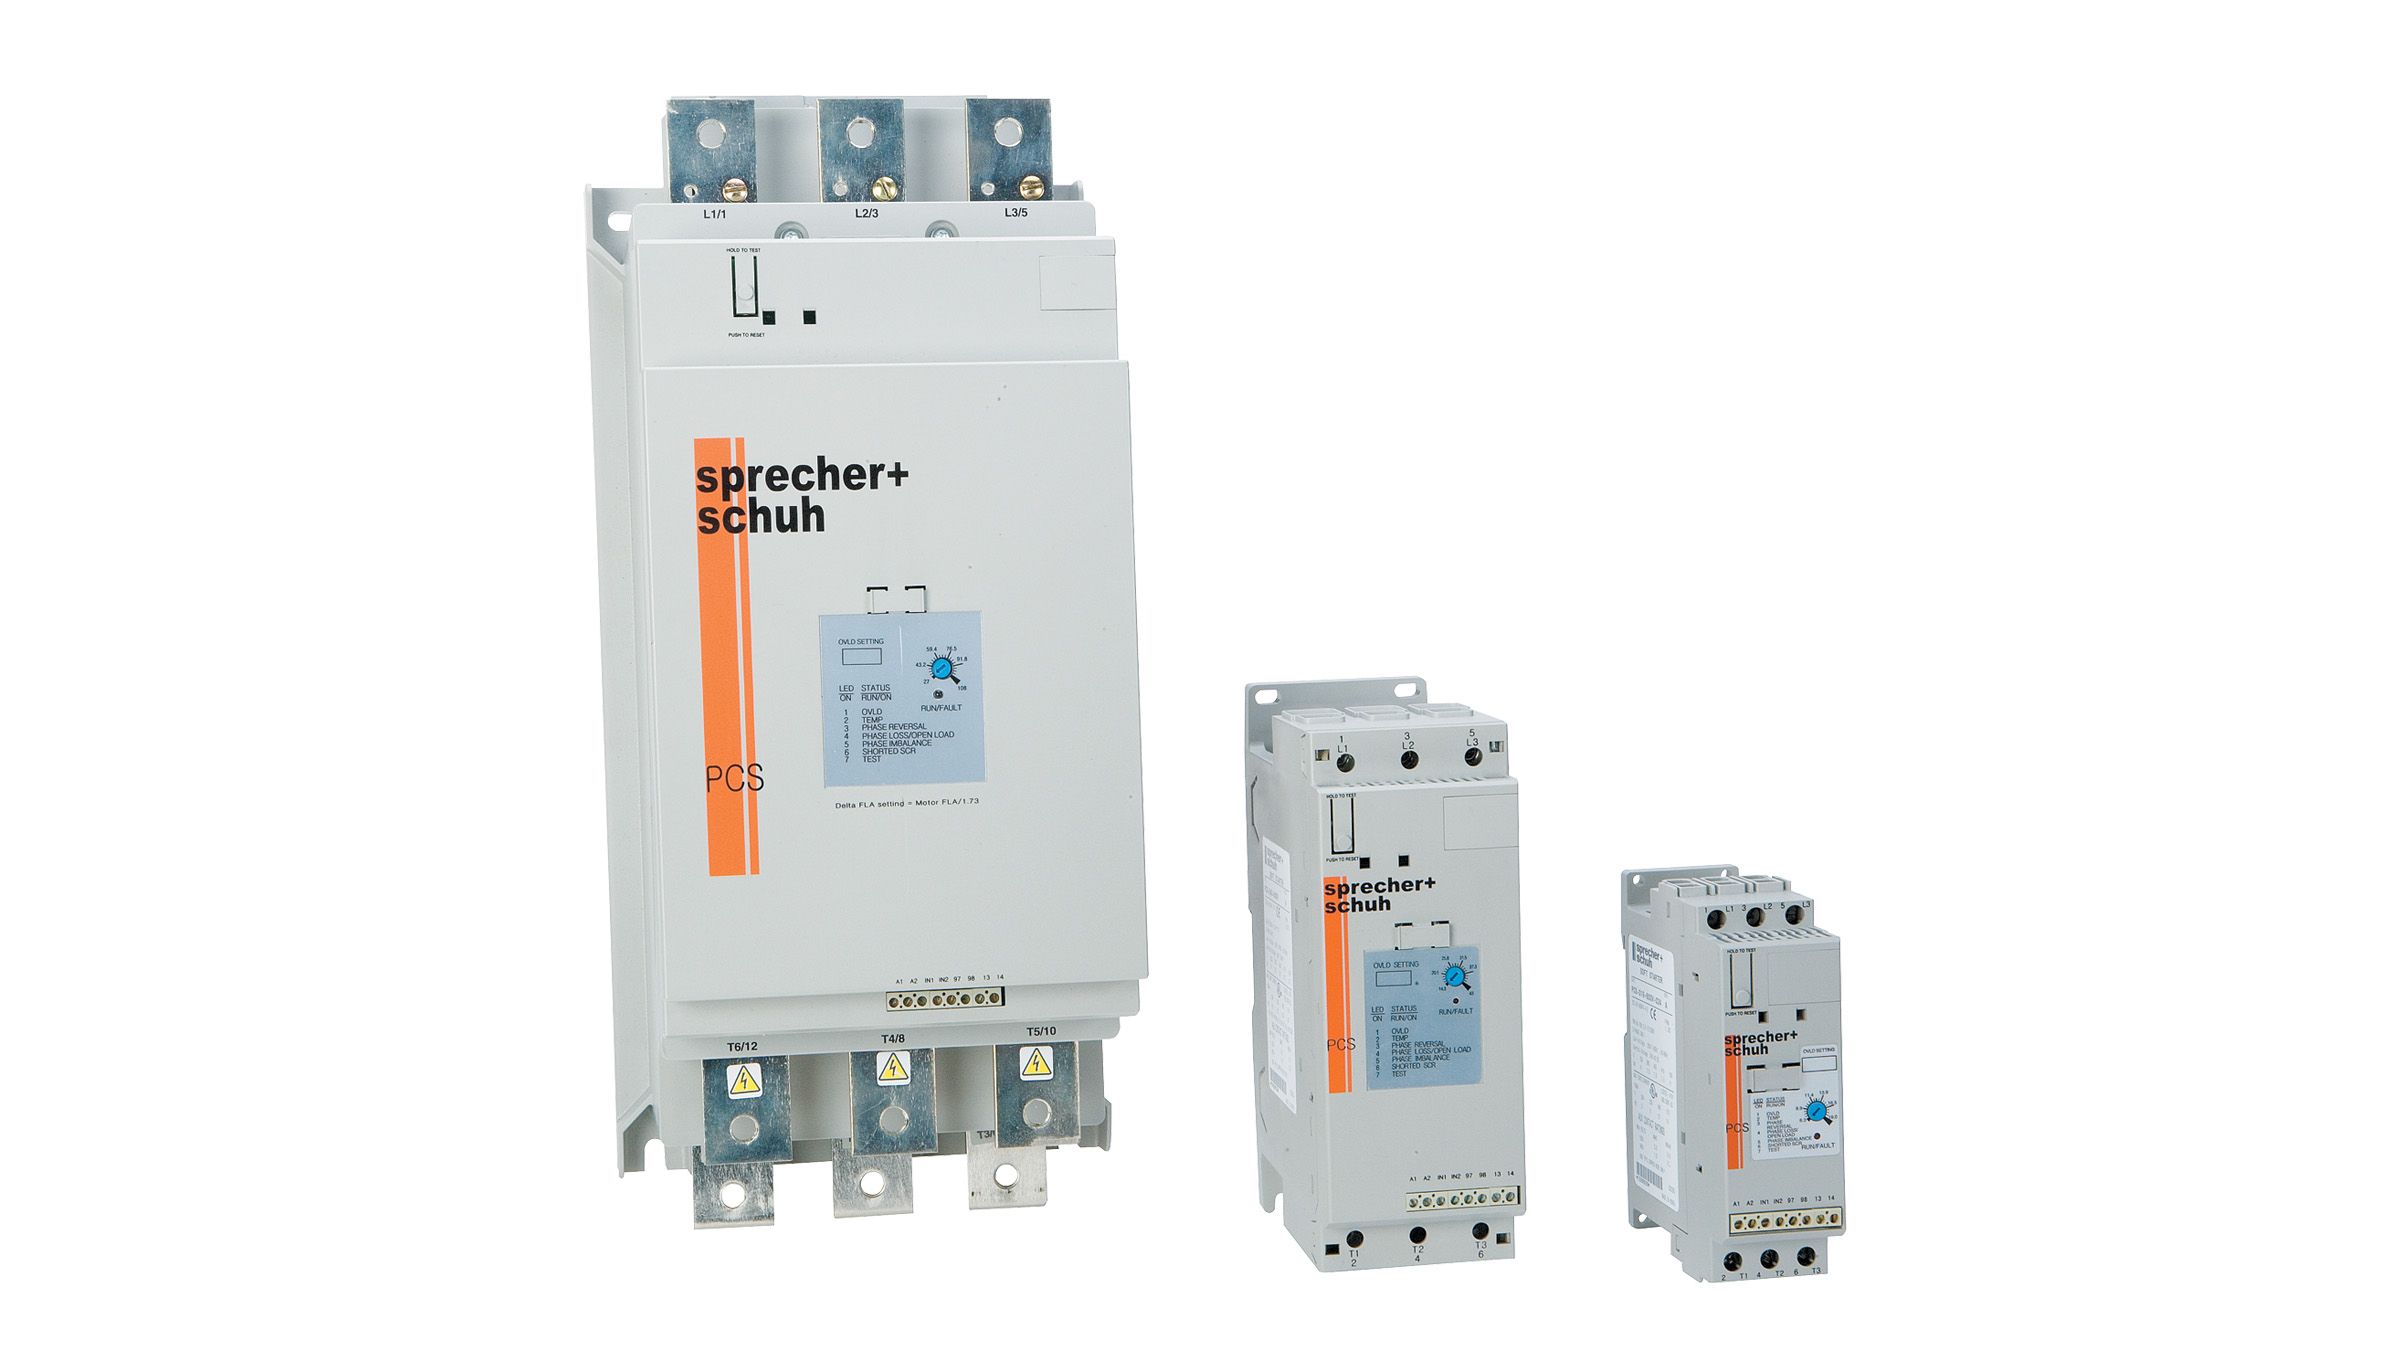 Economical solid-state controller with rich features designed for 3-phase motors up to 400 HP